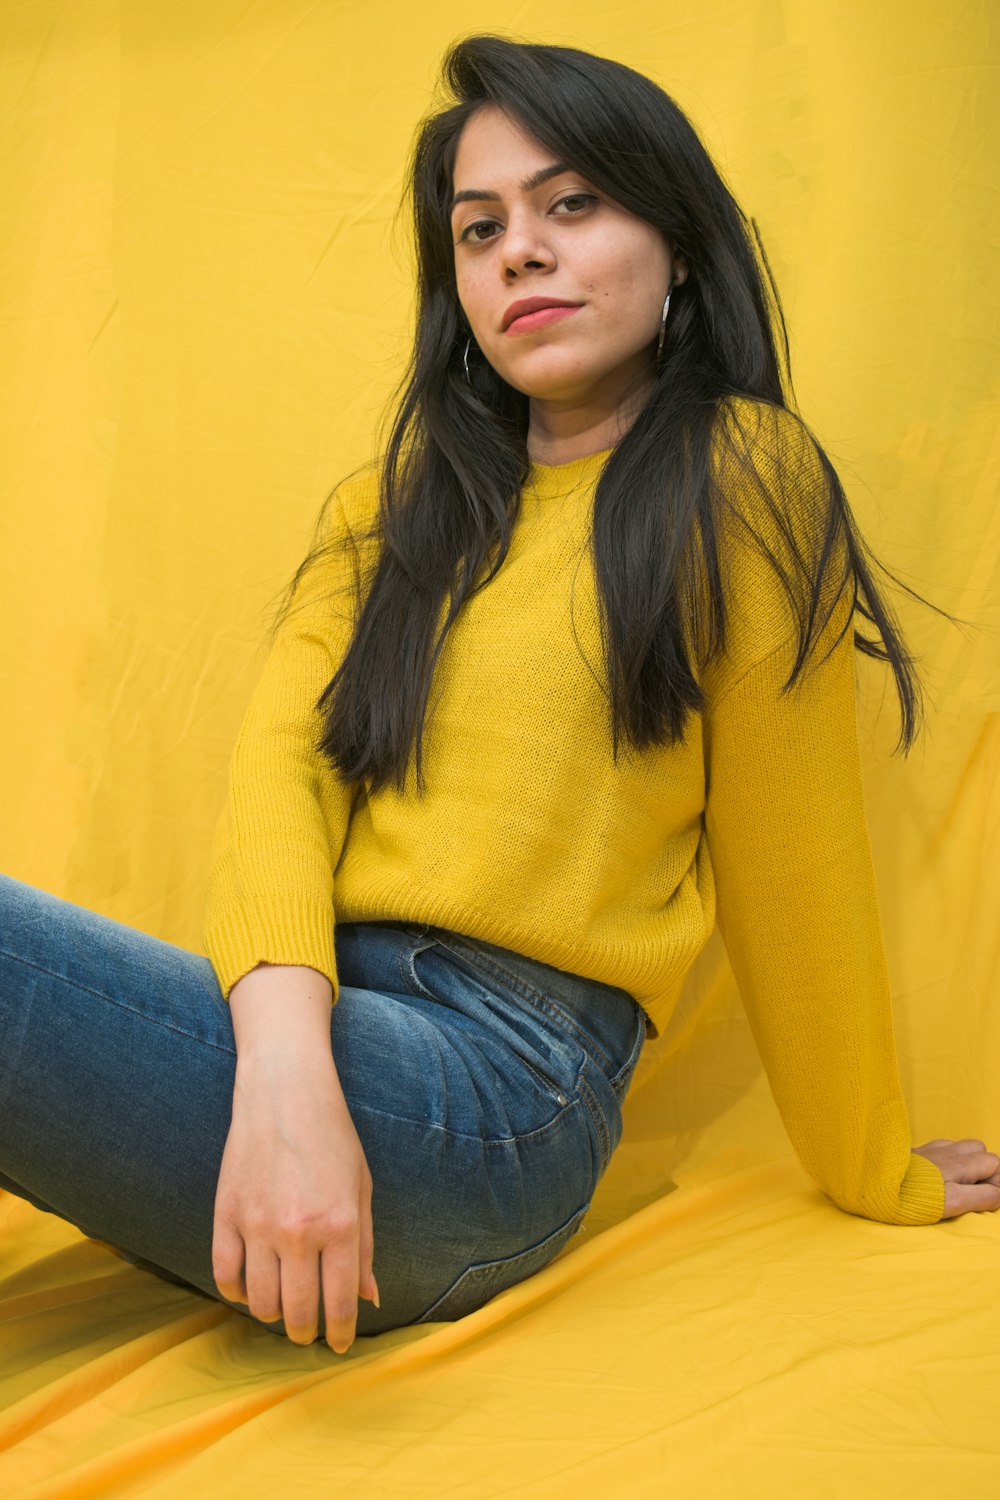 woman in yellow sweater and blue denim jeans sitting on yellow sofa